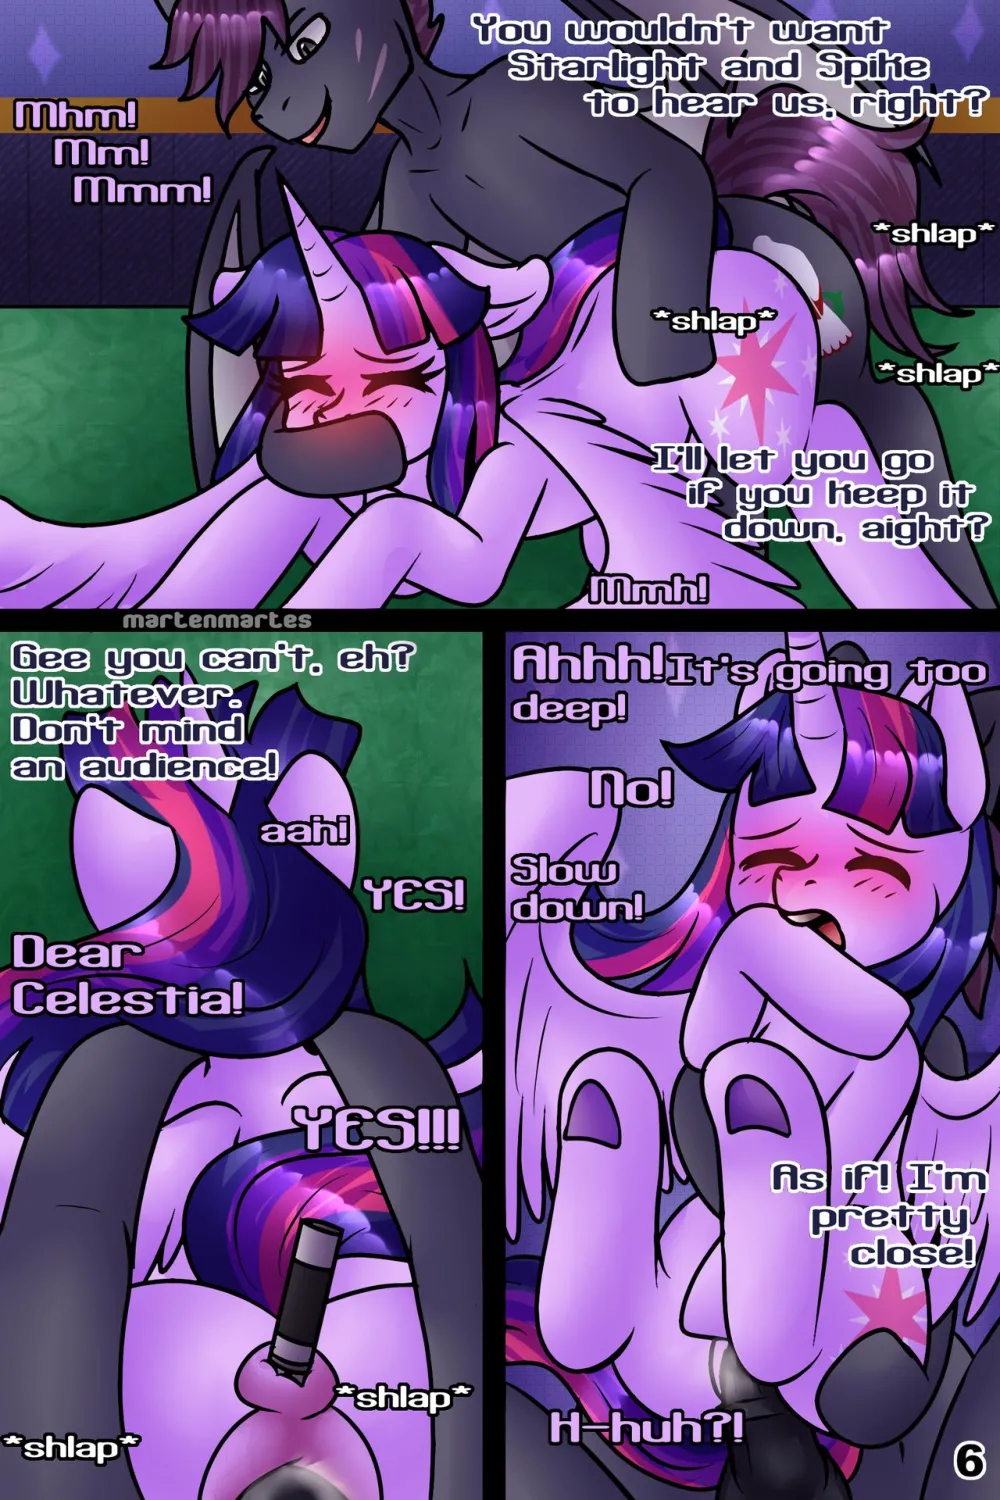 friendship lesson went sexual - Page 7